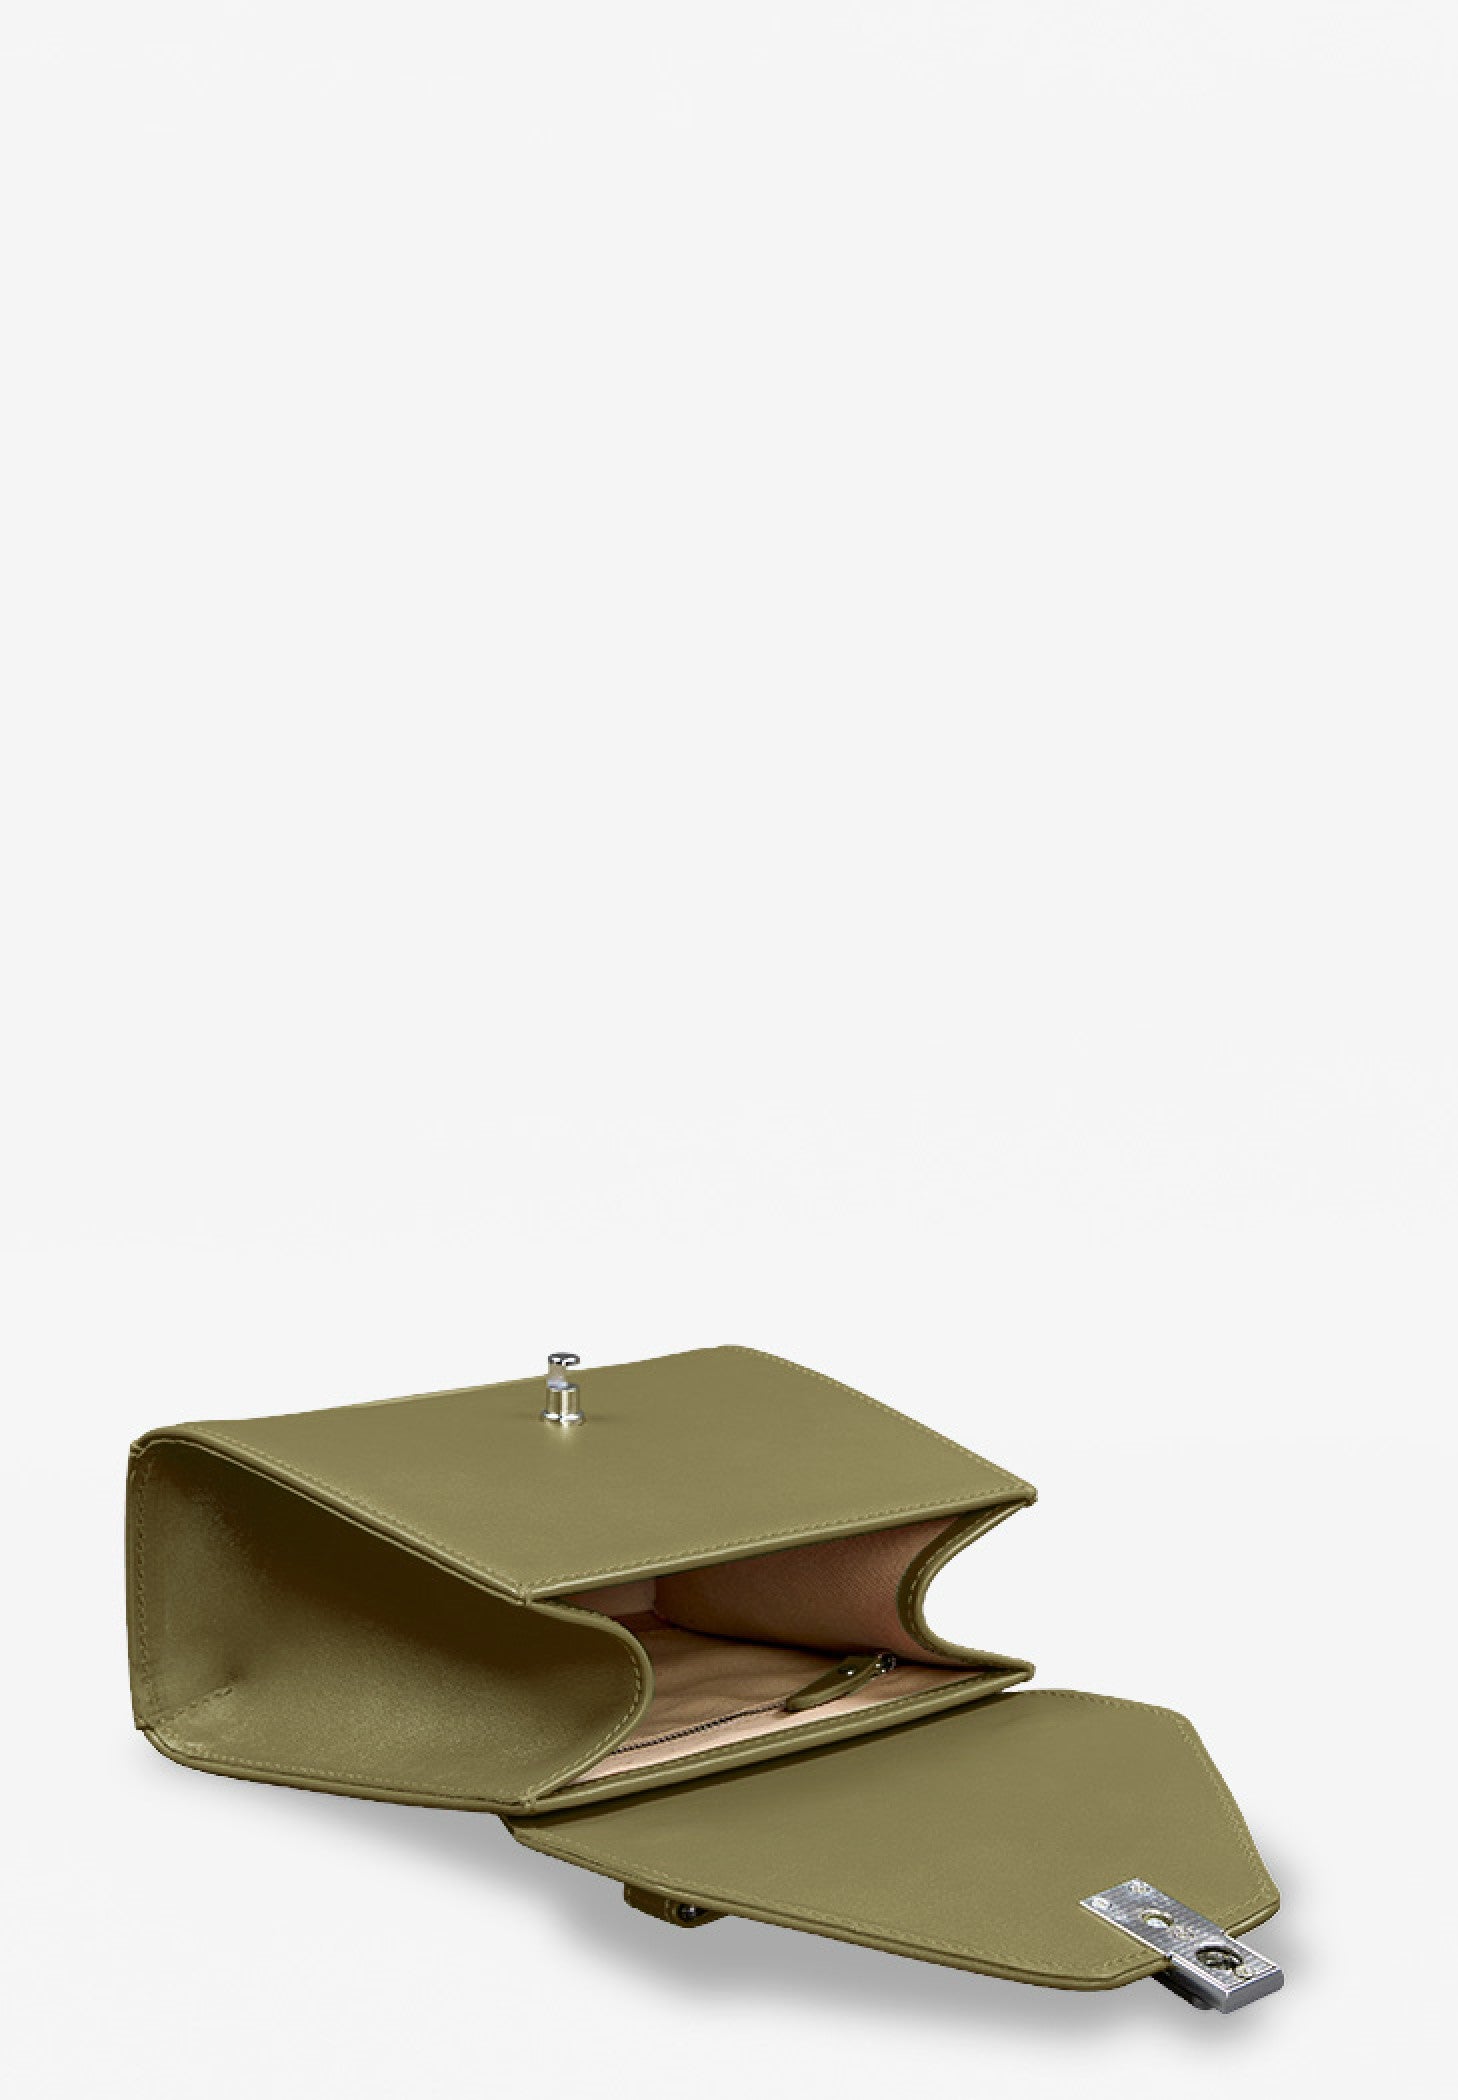 green olive leather bag for women